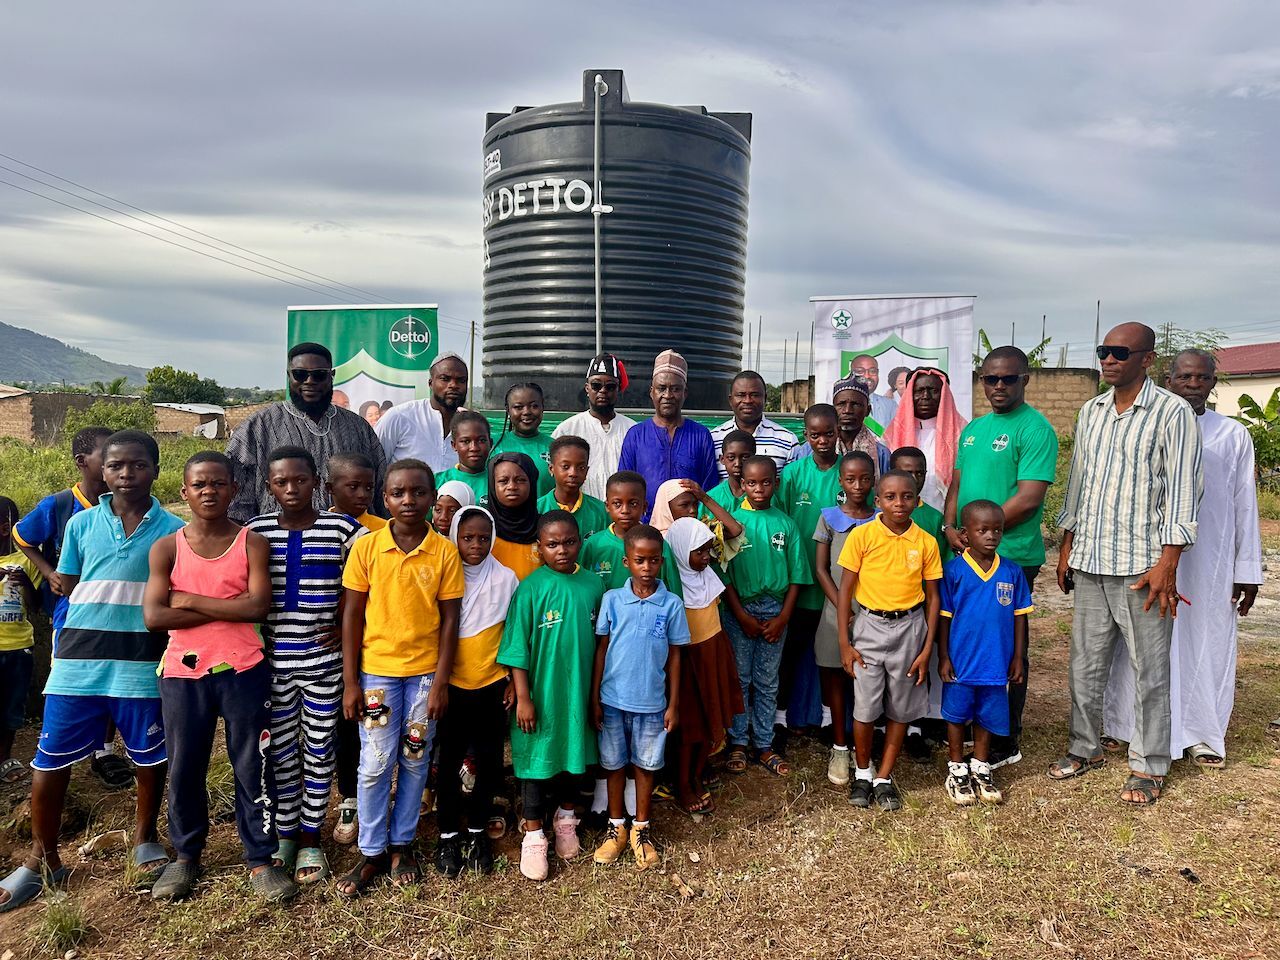 Dettol Ghana commemorates Global Handwashing Day and gives Hygiene Education